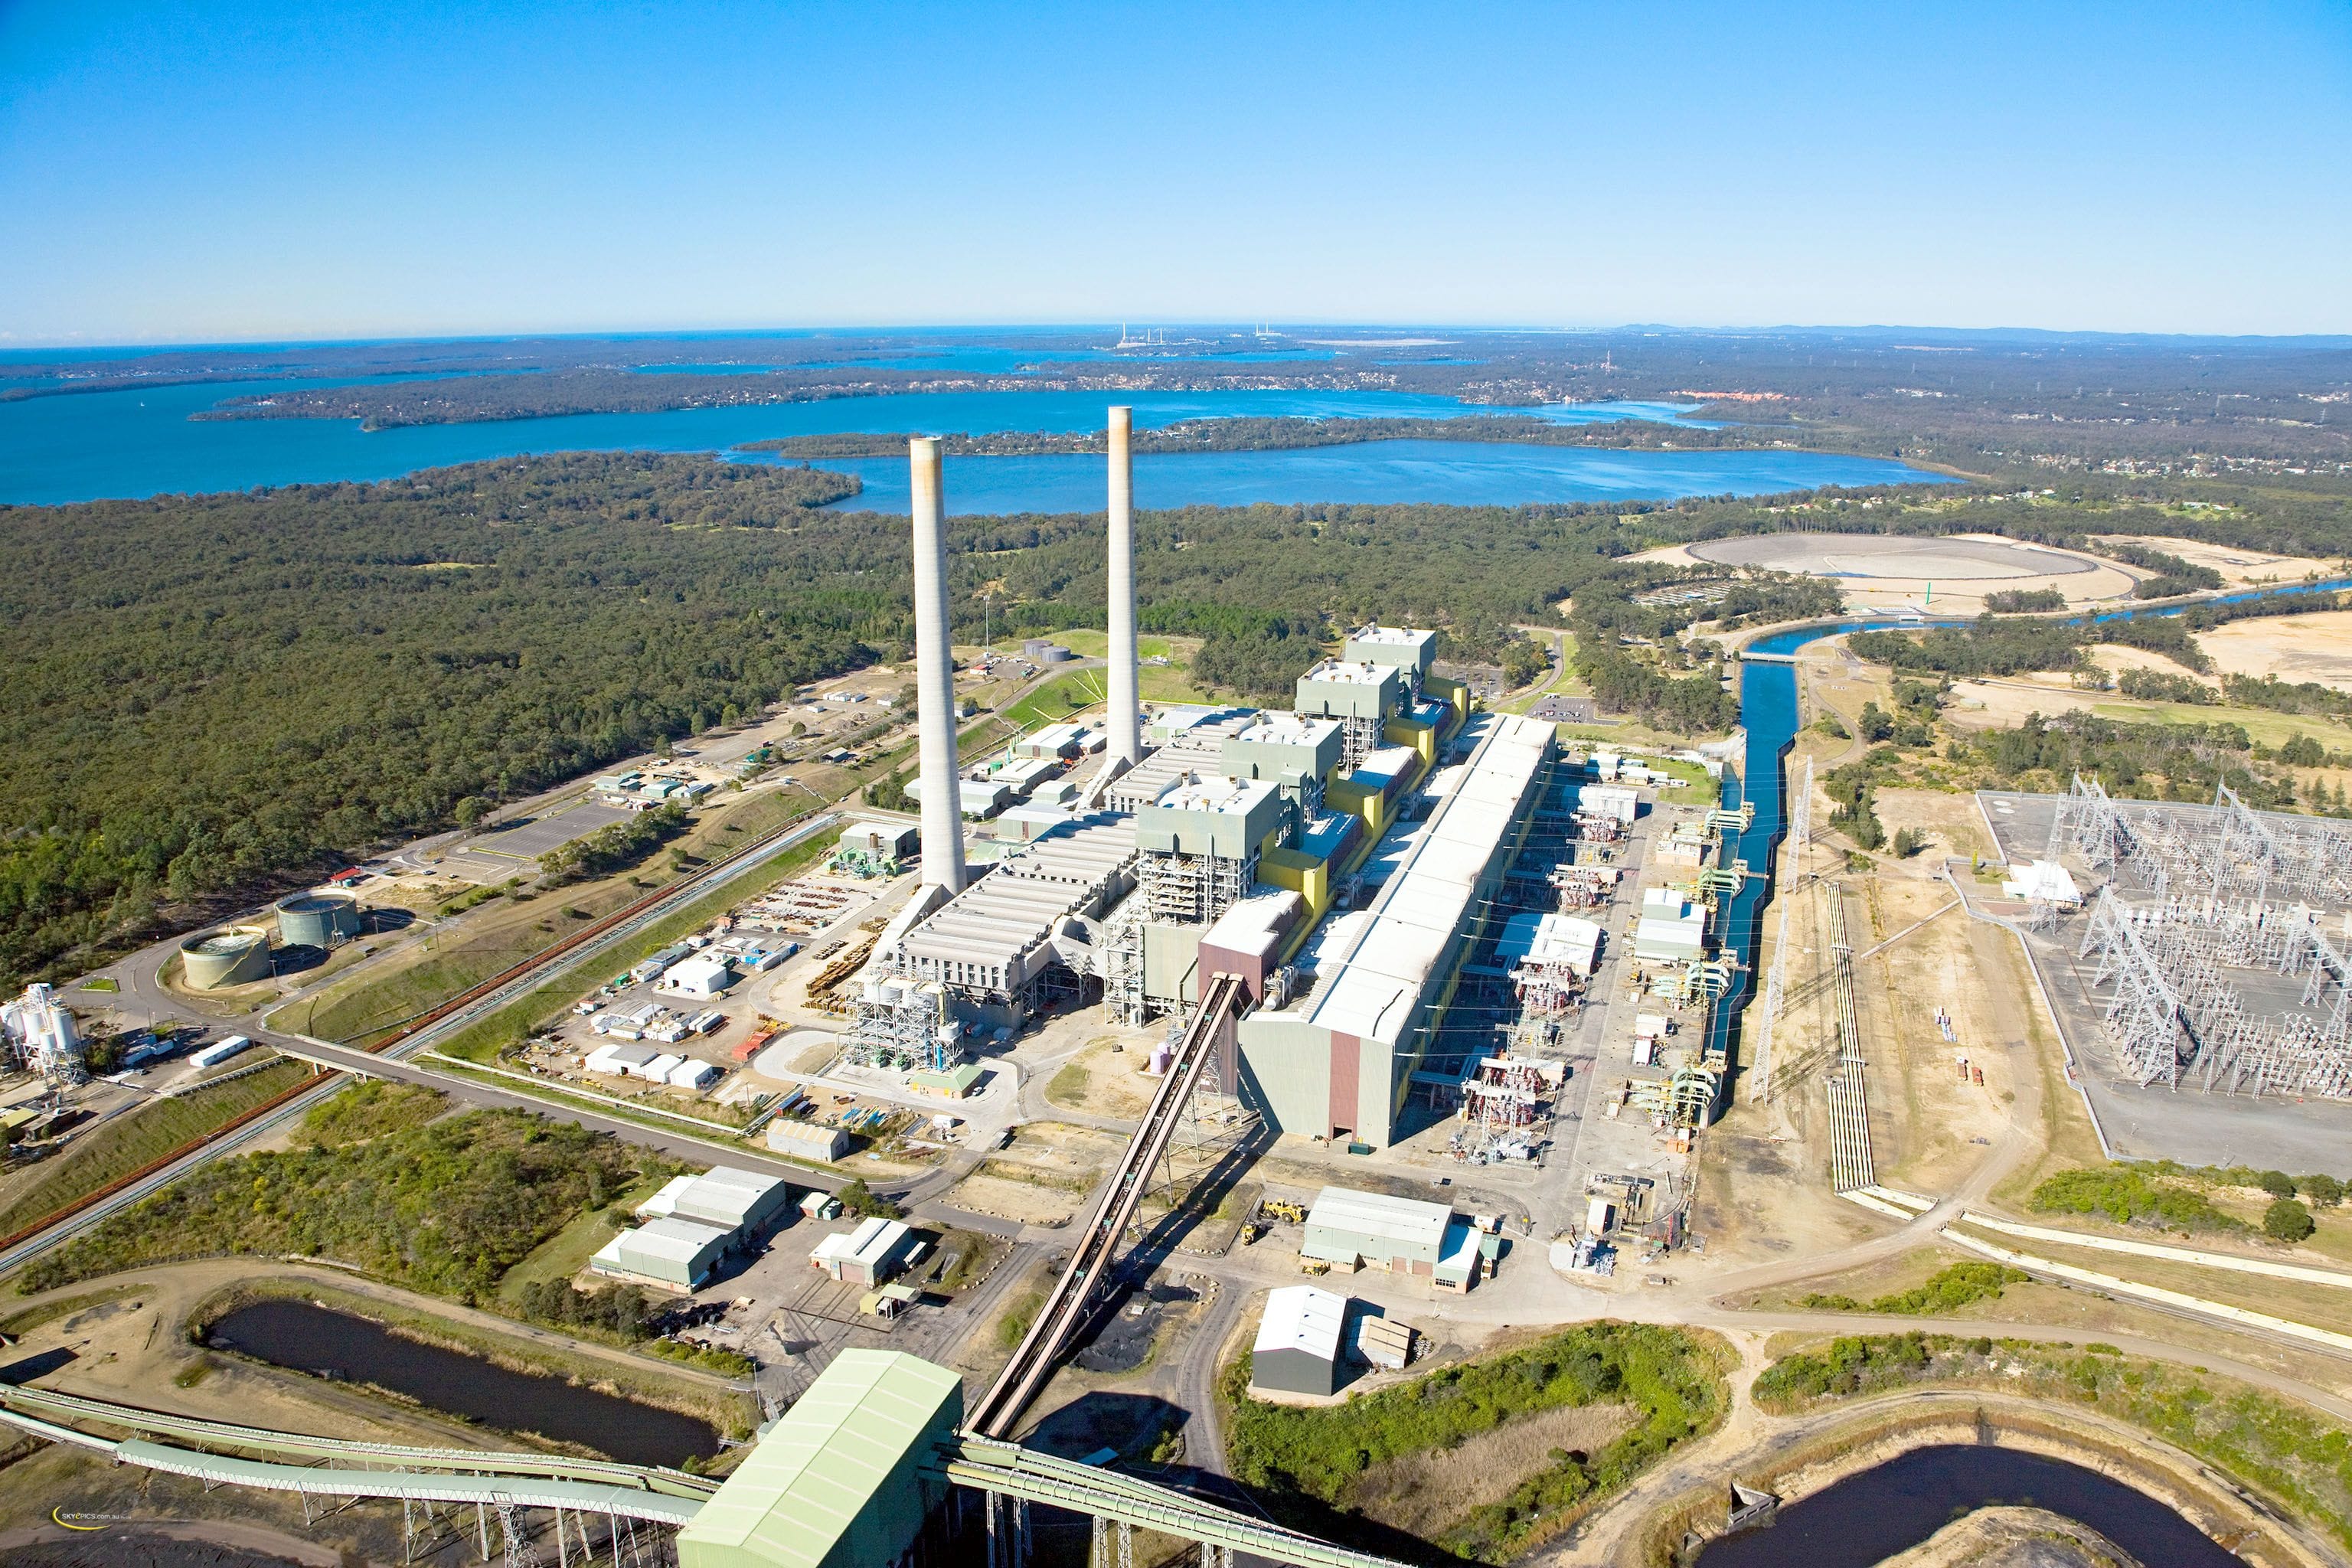 Origin to close Australia's largest coal-fired power station in 2025